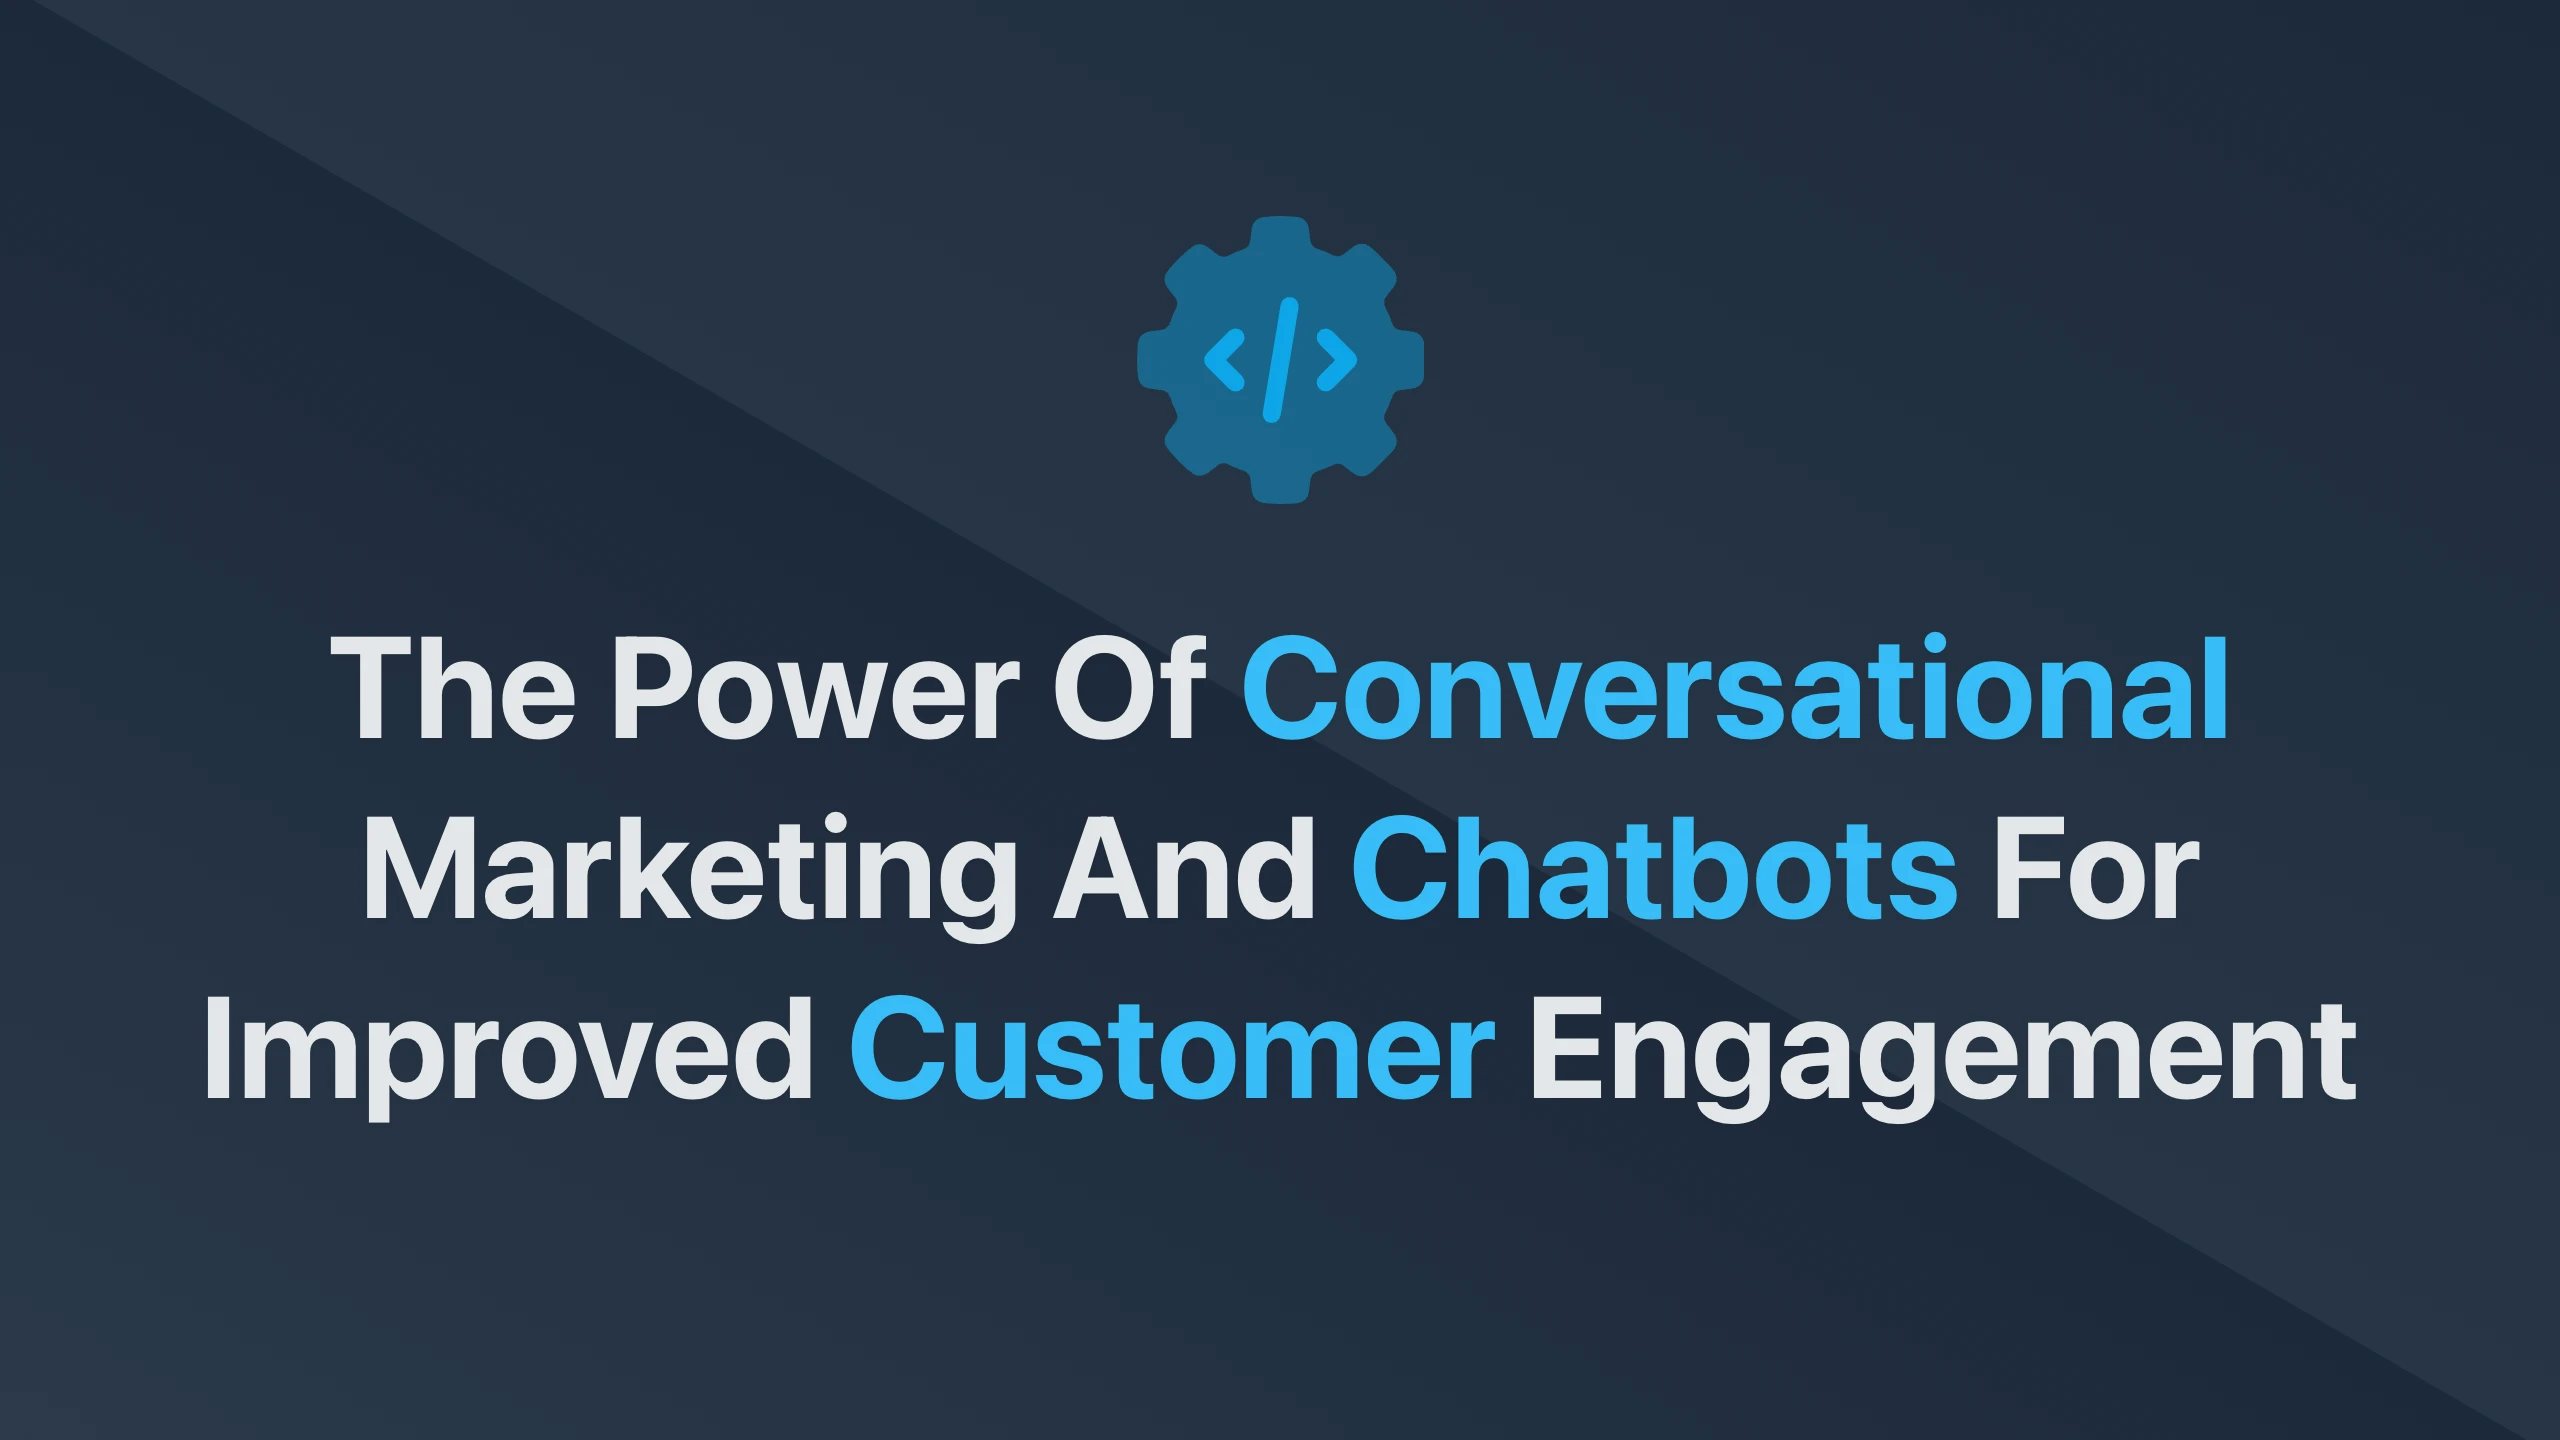 Cover Image for The Power of Conversational Marketing and Chatbots for Improved Customer Engagement